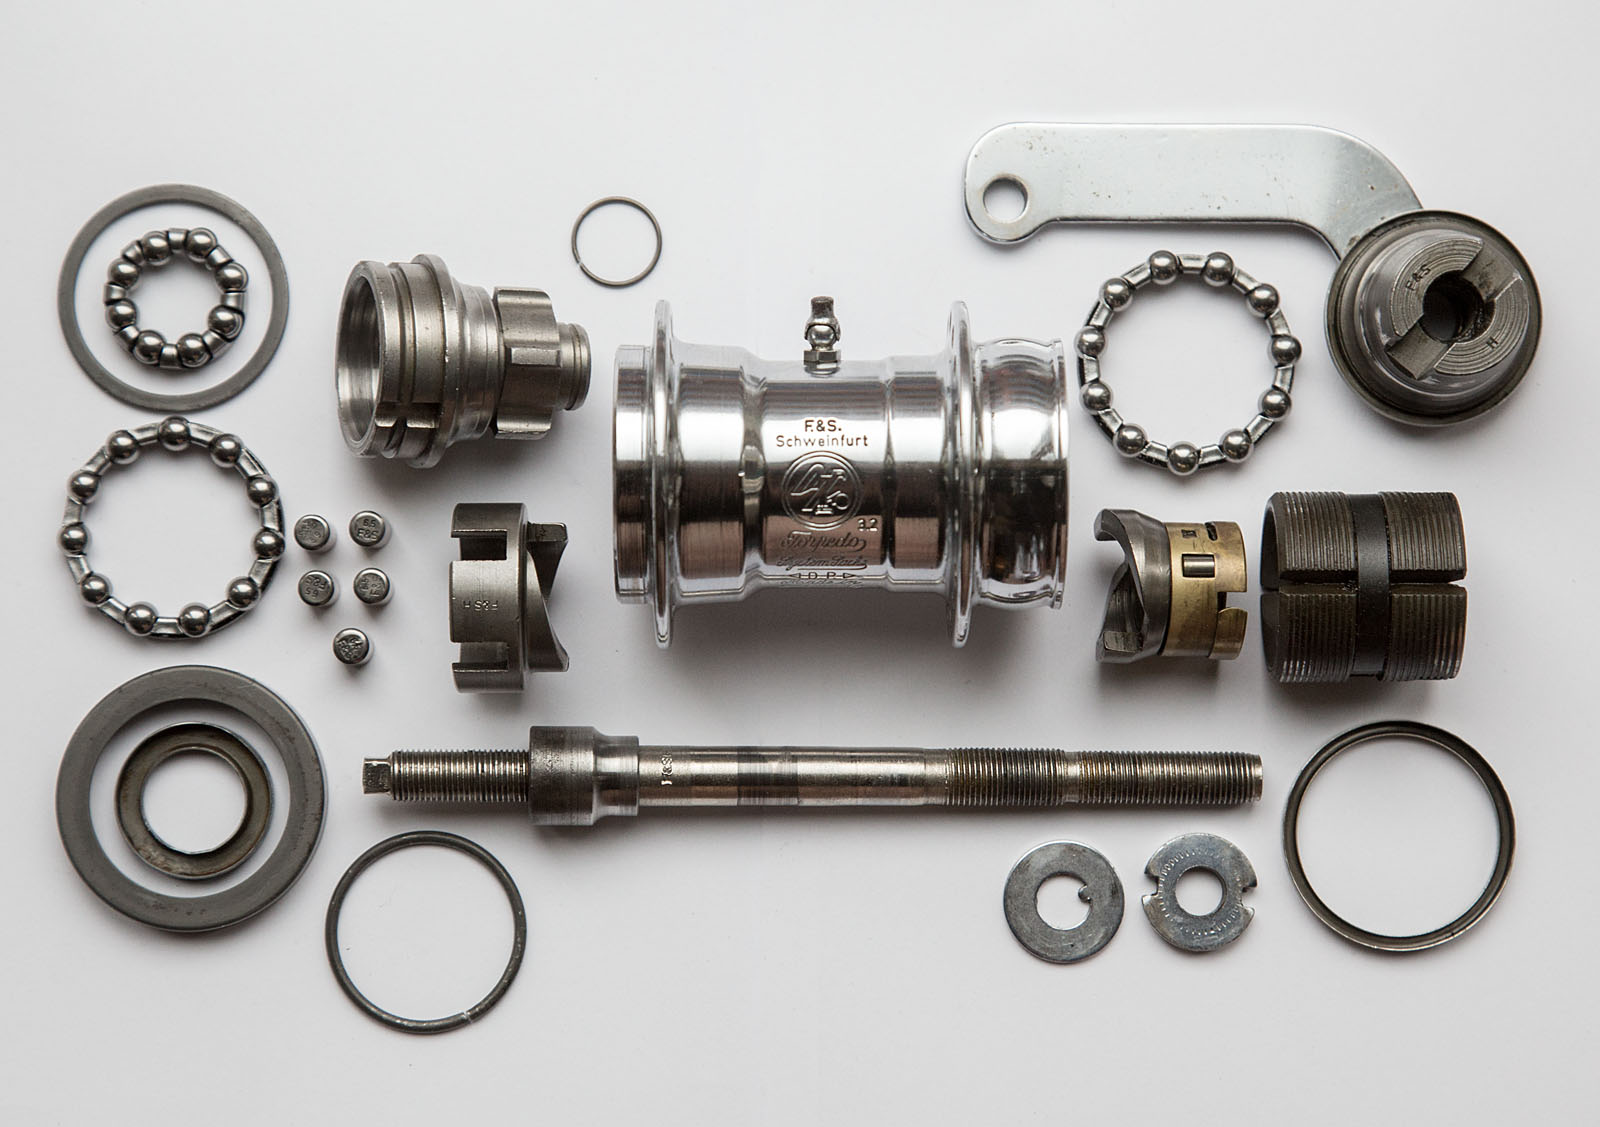 Freilauf hub disassembled exploded view